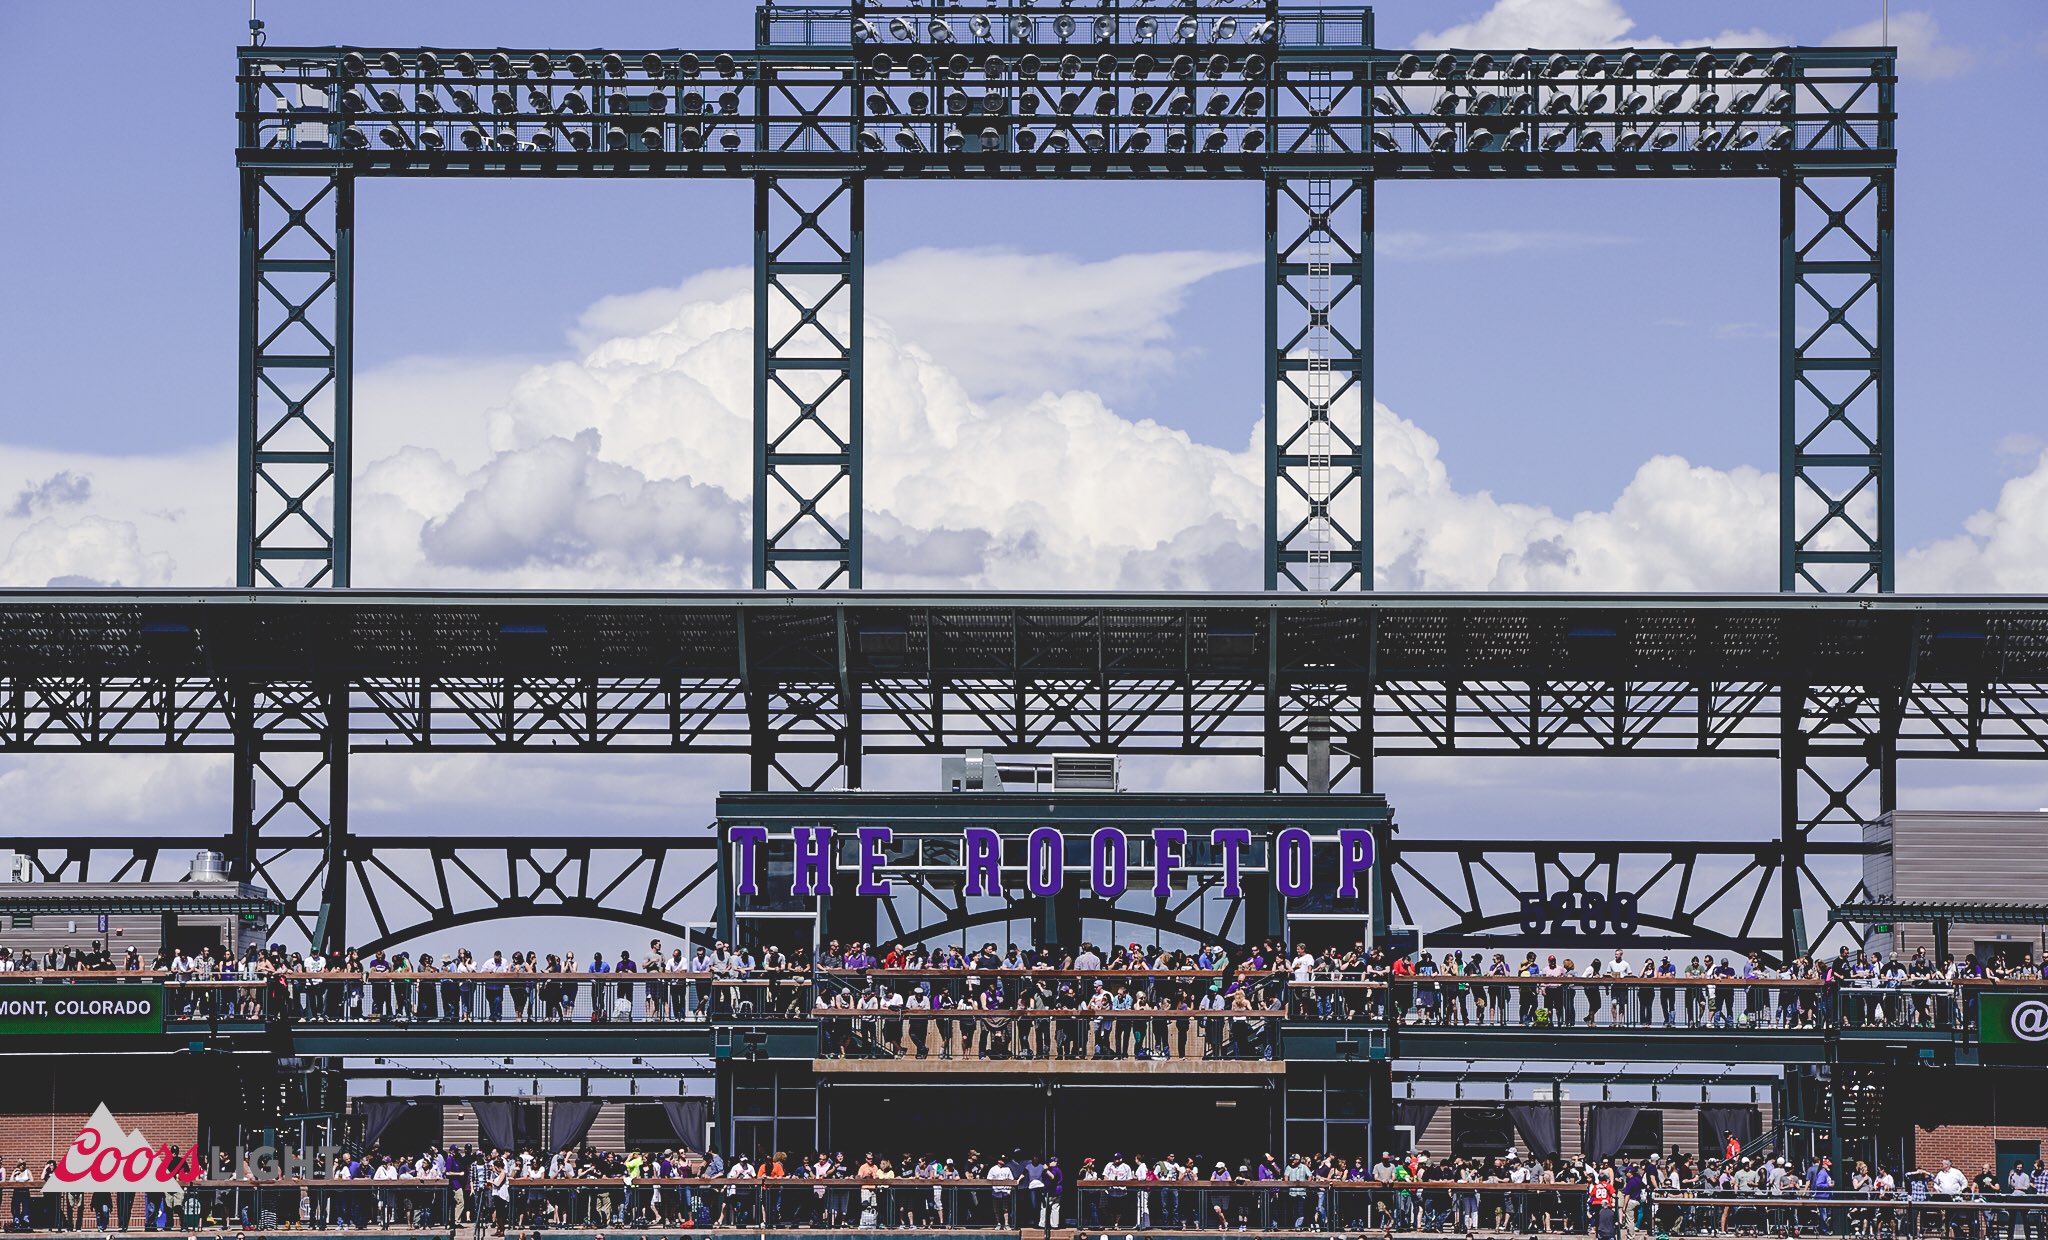 Coors Field on X: An incredible, new scoreboard was installed at